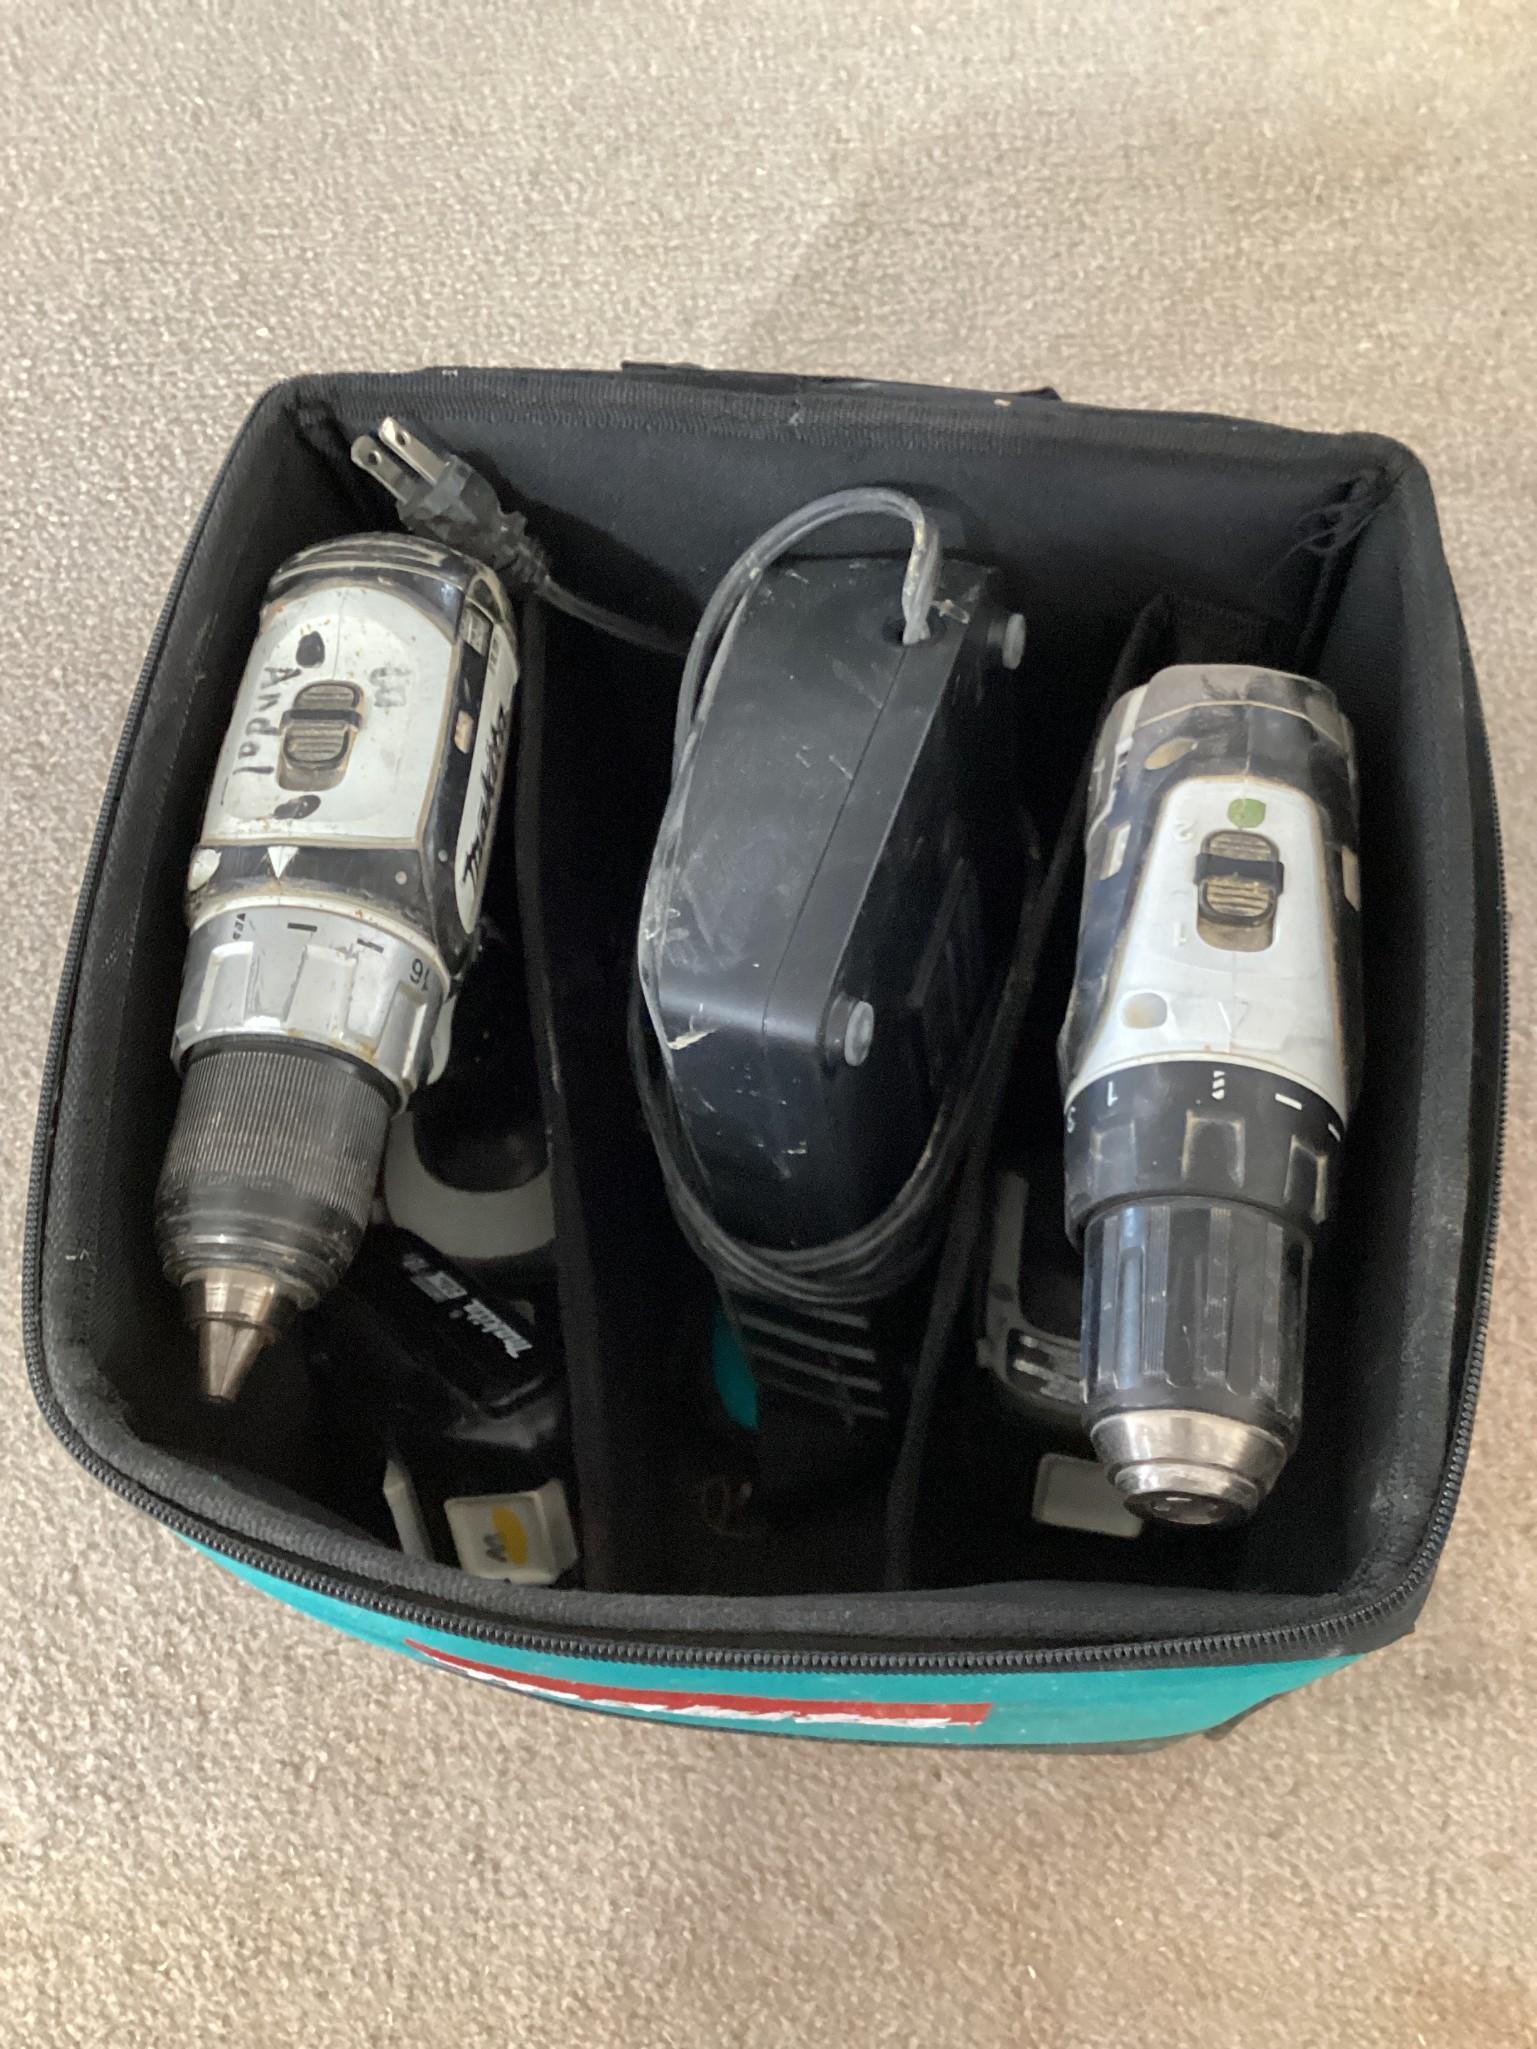 Box Lot, 2 Makita 18 Volt Drills with Charger and 4 Batteries